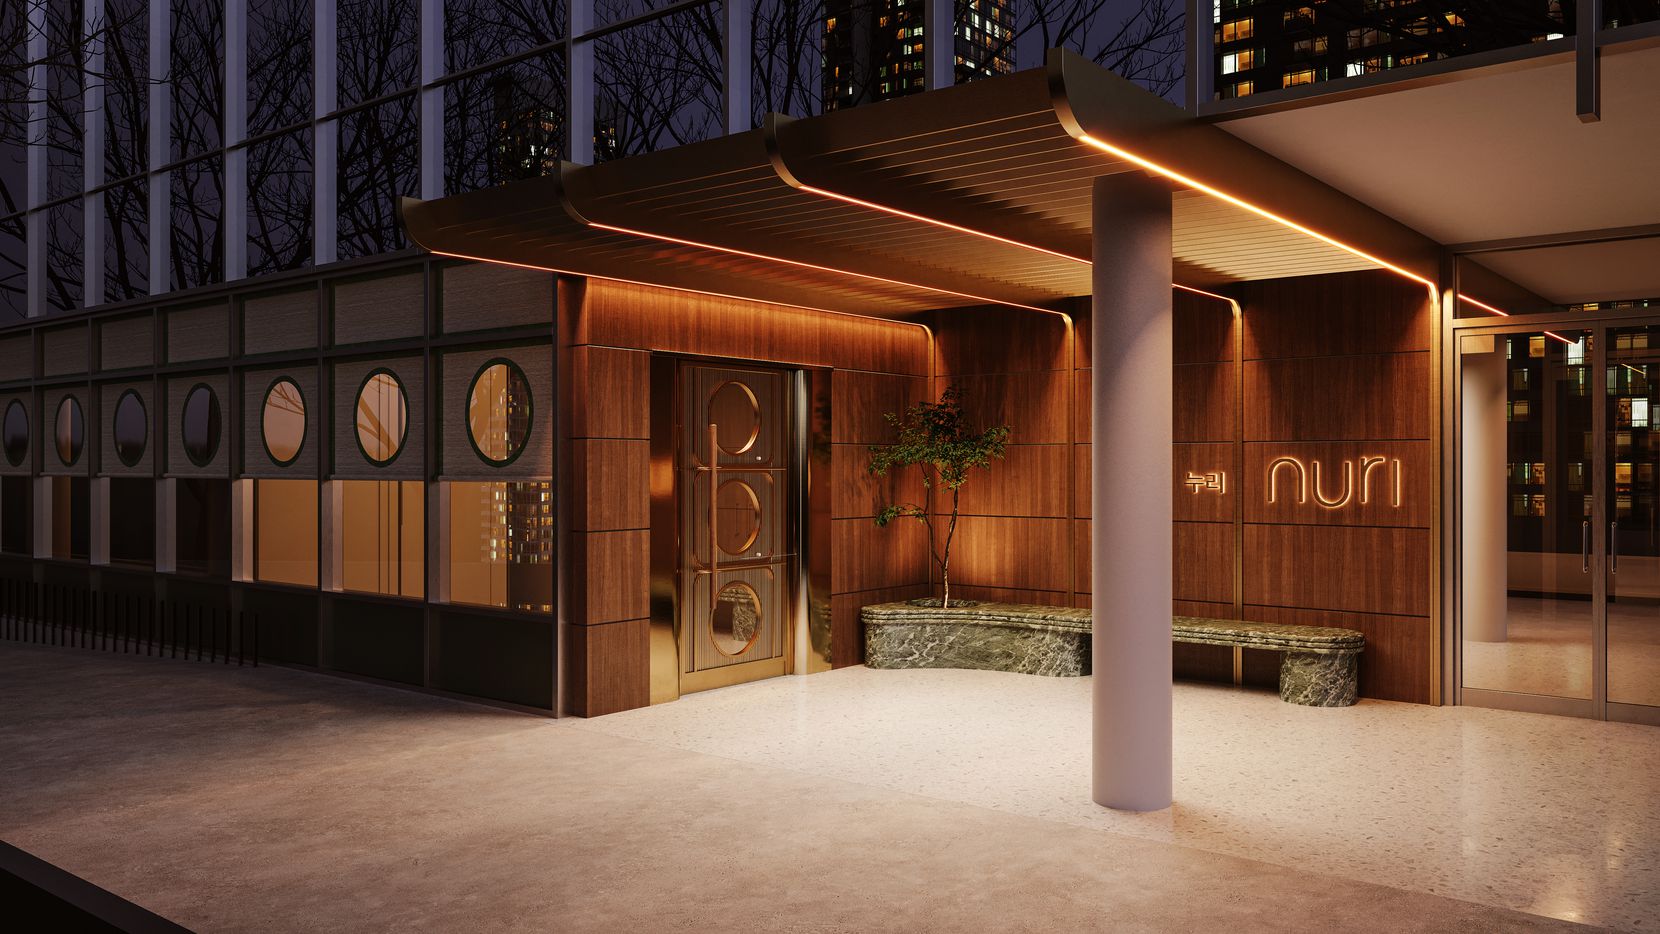 Uptown Dallas is getting a new Asian-inspired steakhouse